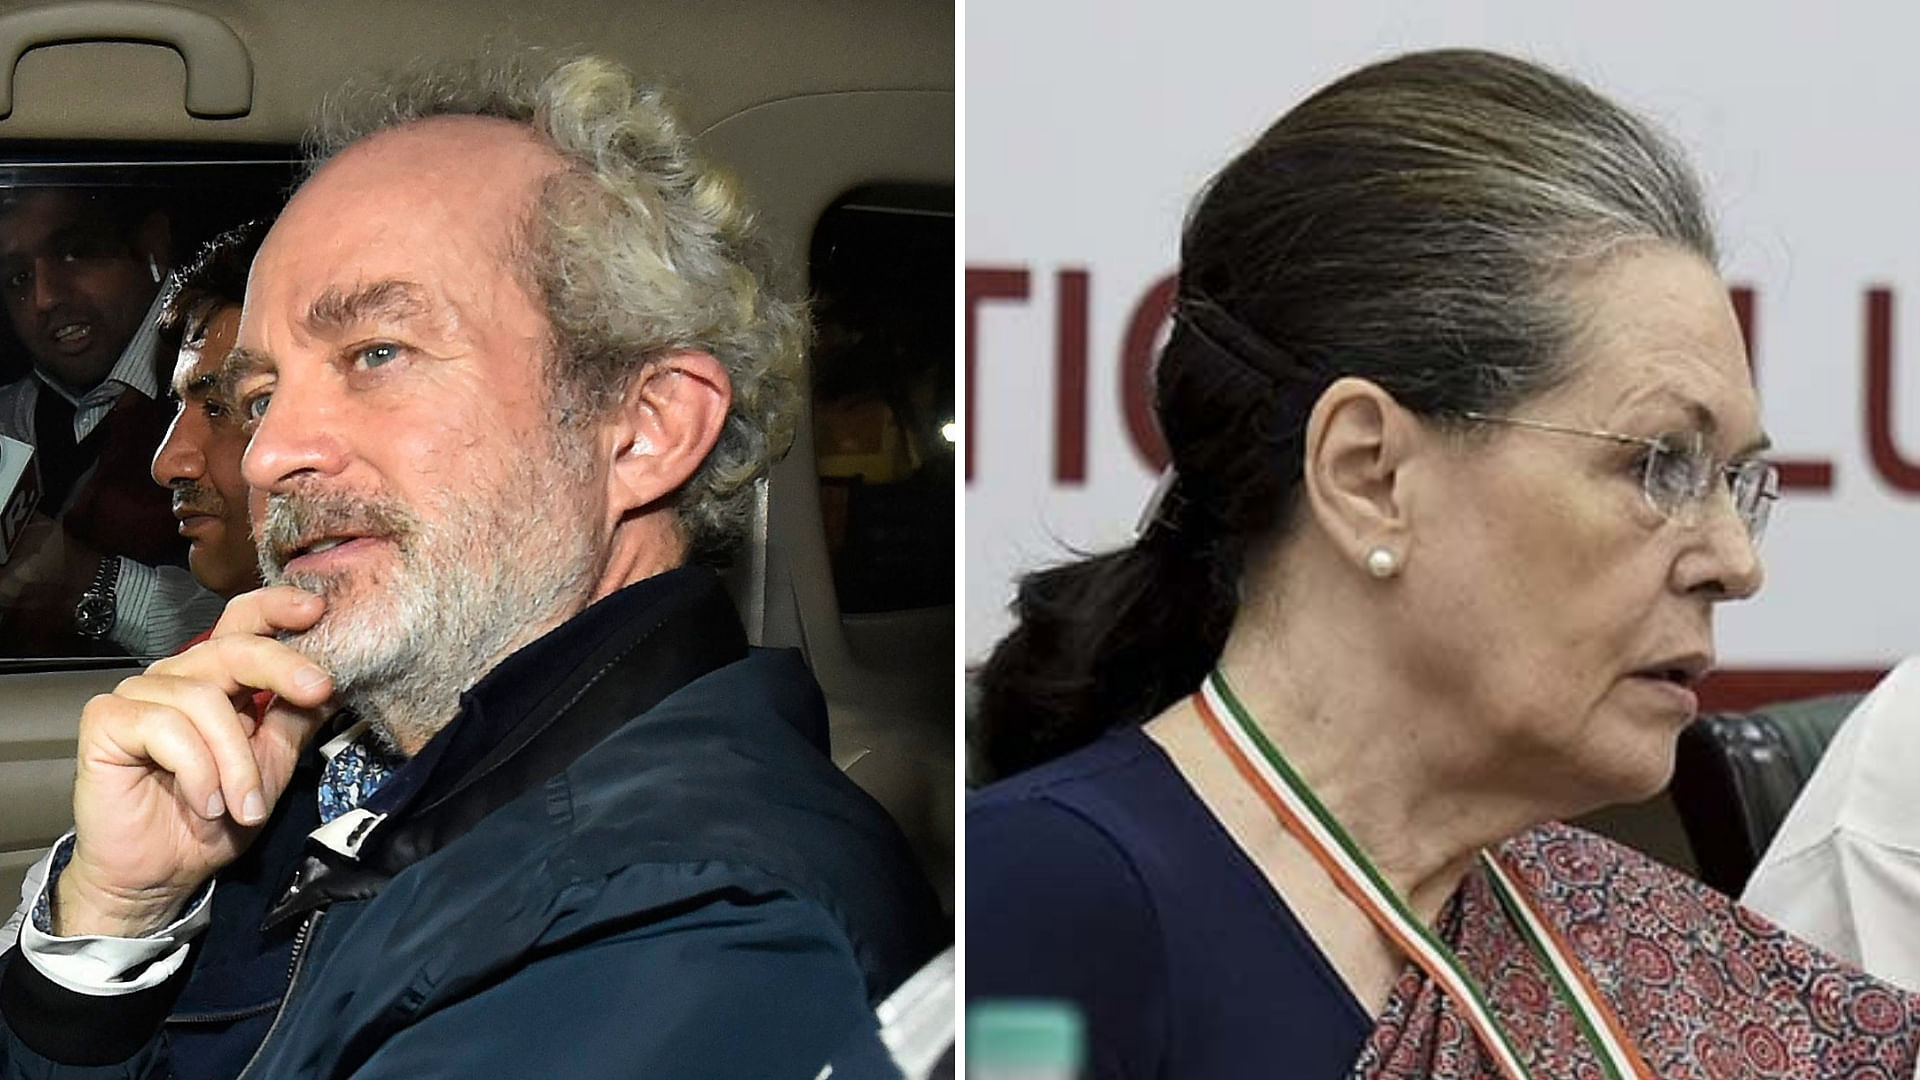 In an interview to<a href="https://www.news18.com/news/india/cbi-wants-me-to-fulfil-its-agenda-of-damaging-oppn-party-says-agustawestland-middleman-christian-michel-1840881.html"> CNN-News18</a> in August 2018, alleged AugustaWestland middleman Christian Michel said that he was being targeted as part of an agenda by the CBI against the Opposition.